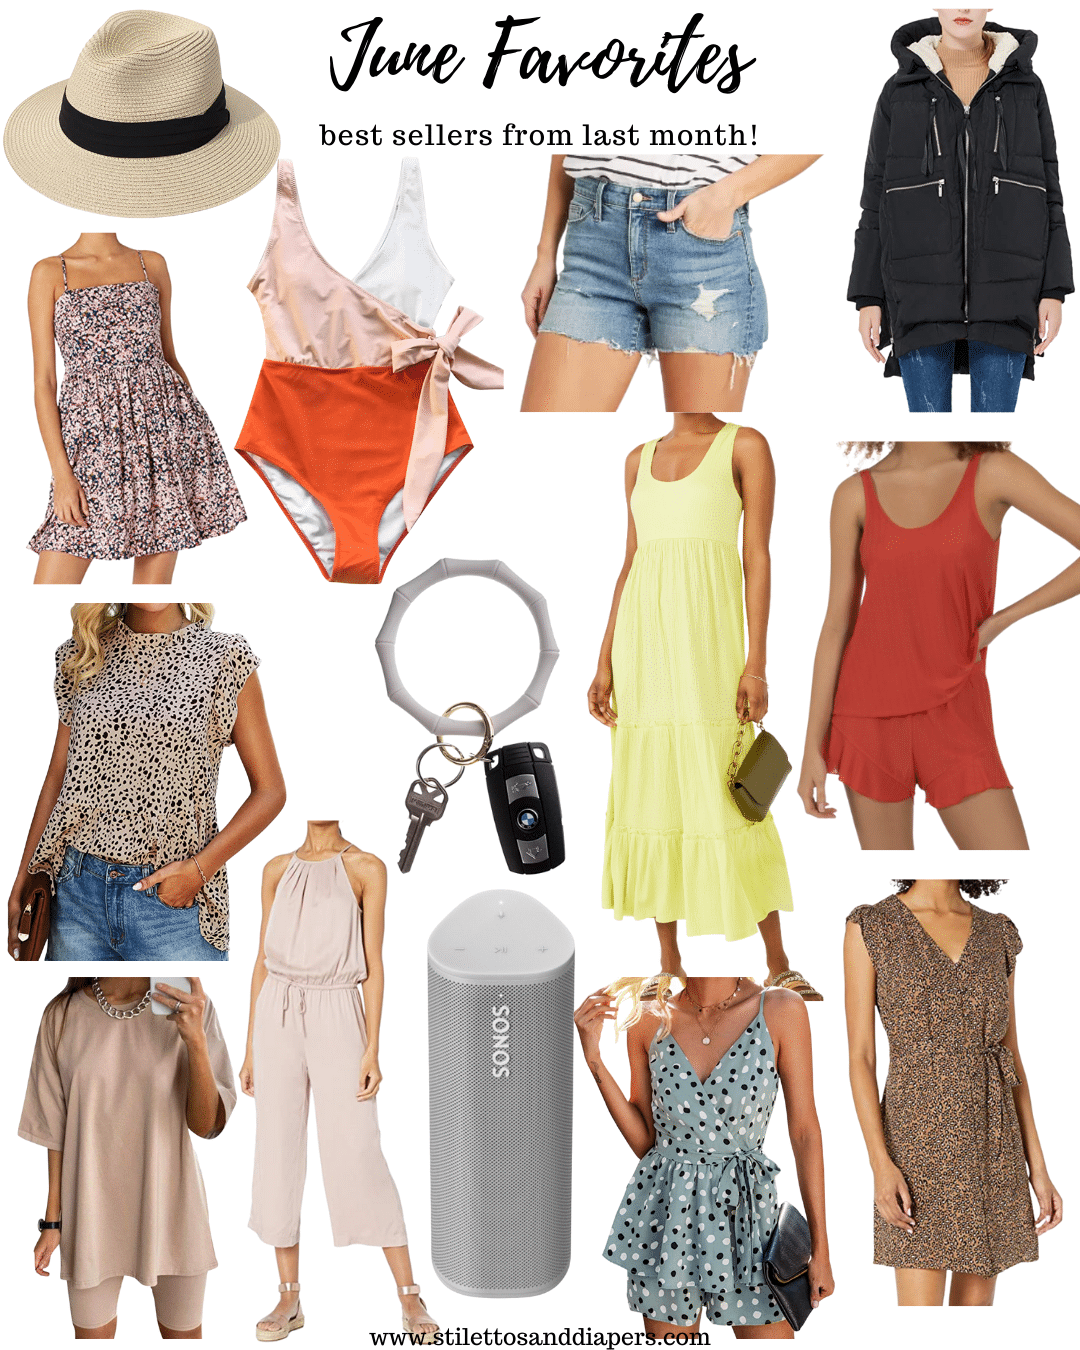 June Best Sellers, Summer favorite clothing, Amazon style, Stilettos and Diapers